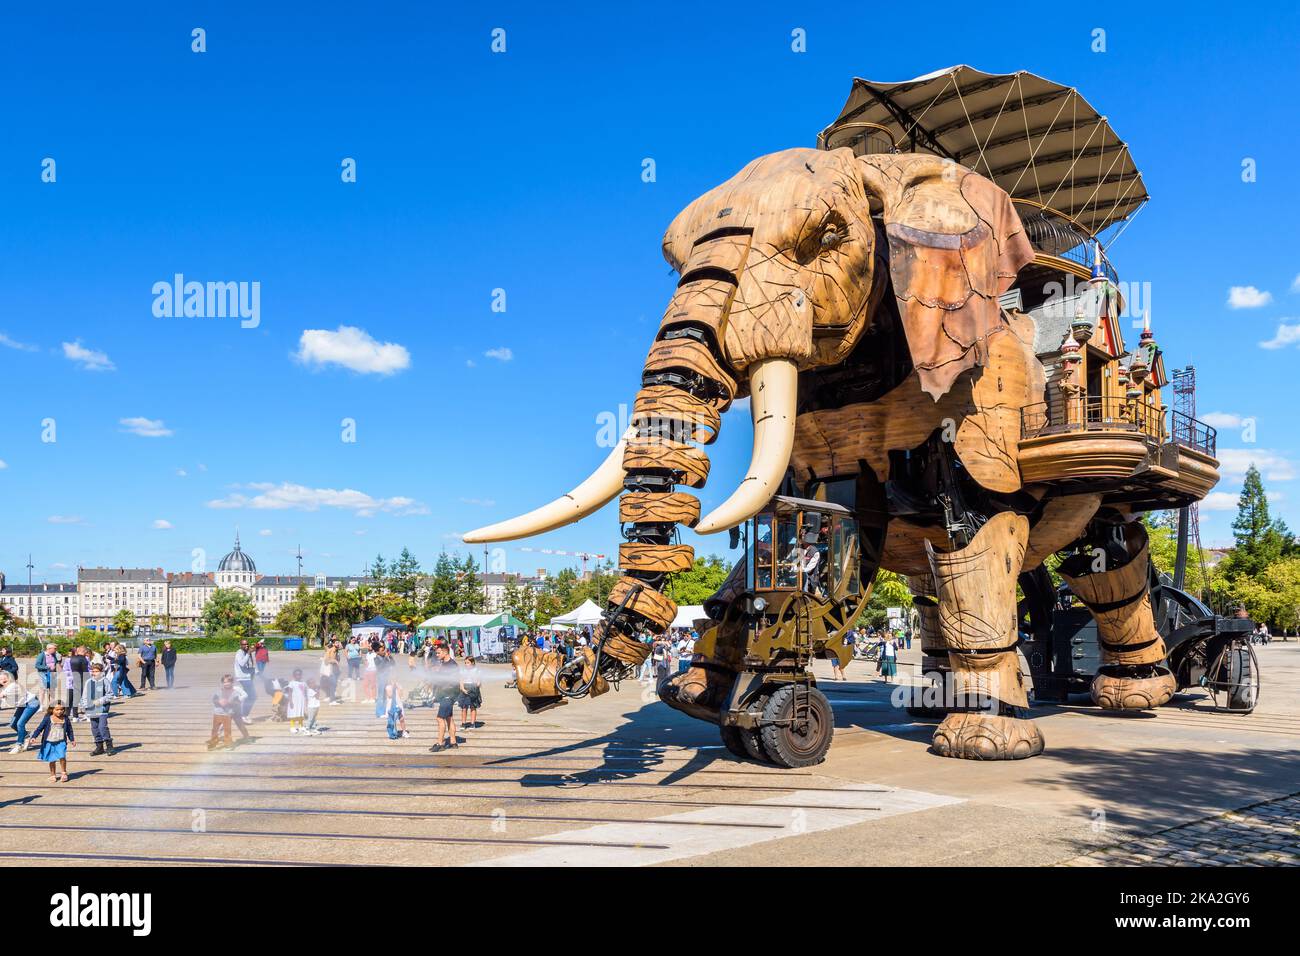 The Great Elephant giant puppet, part of the Machines of the Isle of Nantes tourist attraction, sprays water with its trunk on excited children. Stock Photo